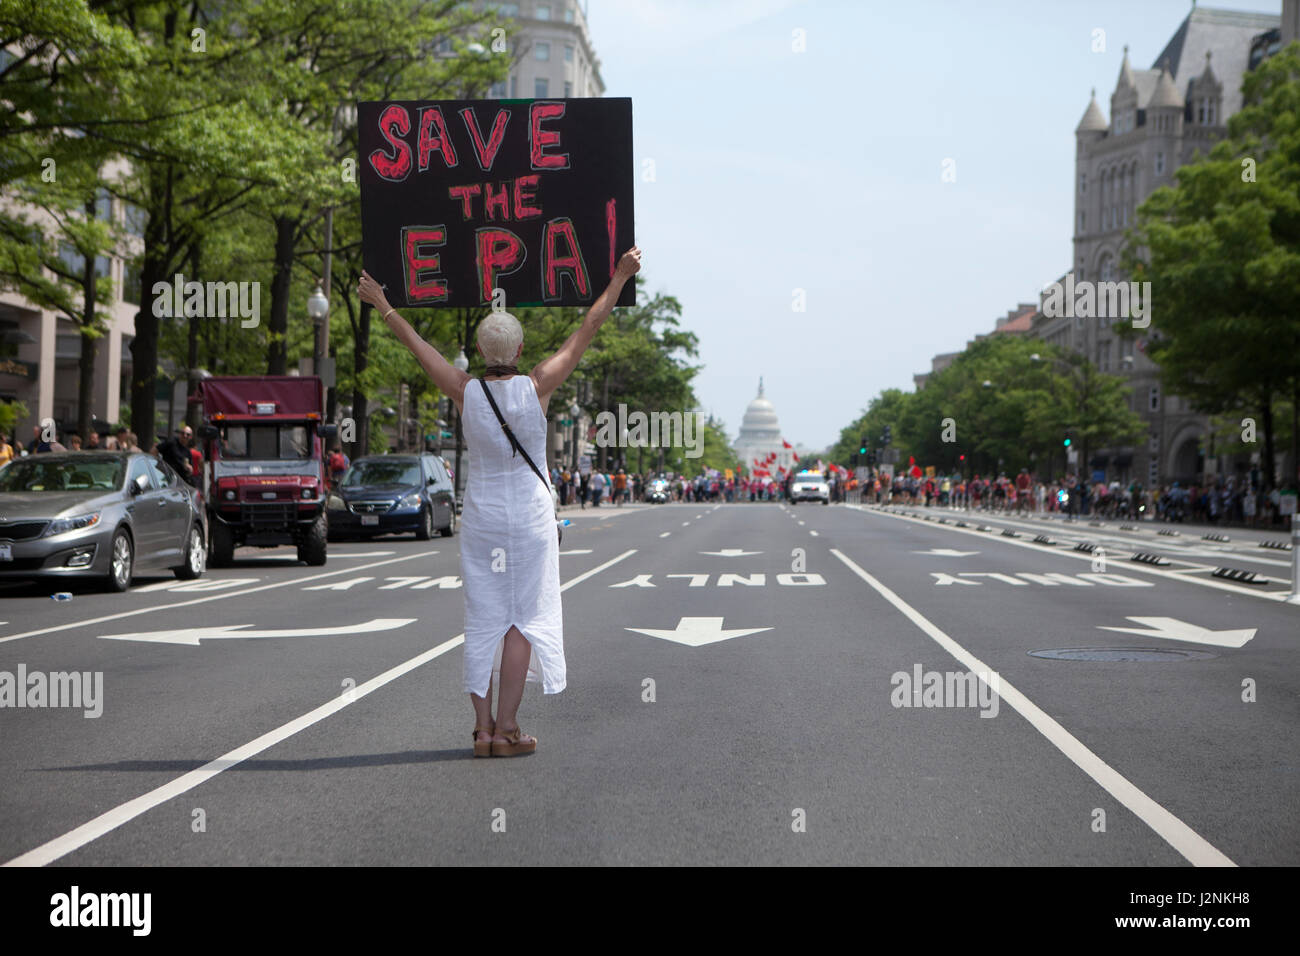 Washington, DC, USA, 29th Apr. 2017:  Thousands of Indigenous Americans, environmentalists, scientists, immigrants, religious, educators, and many others gather in Washington to resist against the Trump administration's 'attack' on the climate, air, and water during the People's Climate March. Pictured: Woman holding 'Save the EPA' sign. Credit: B Christopher/Alamy Live News Stock Photo